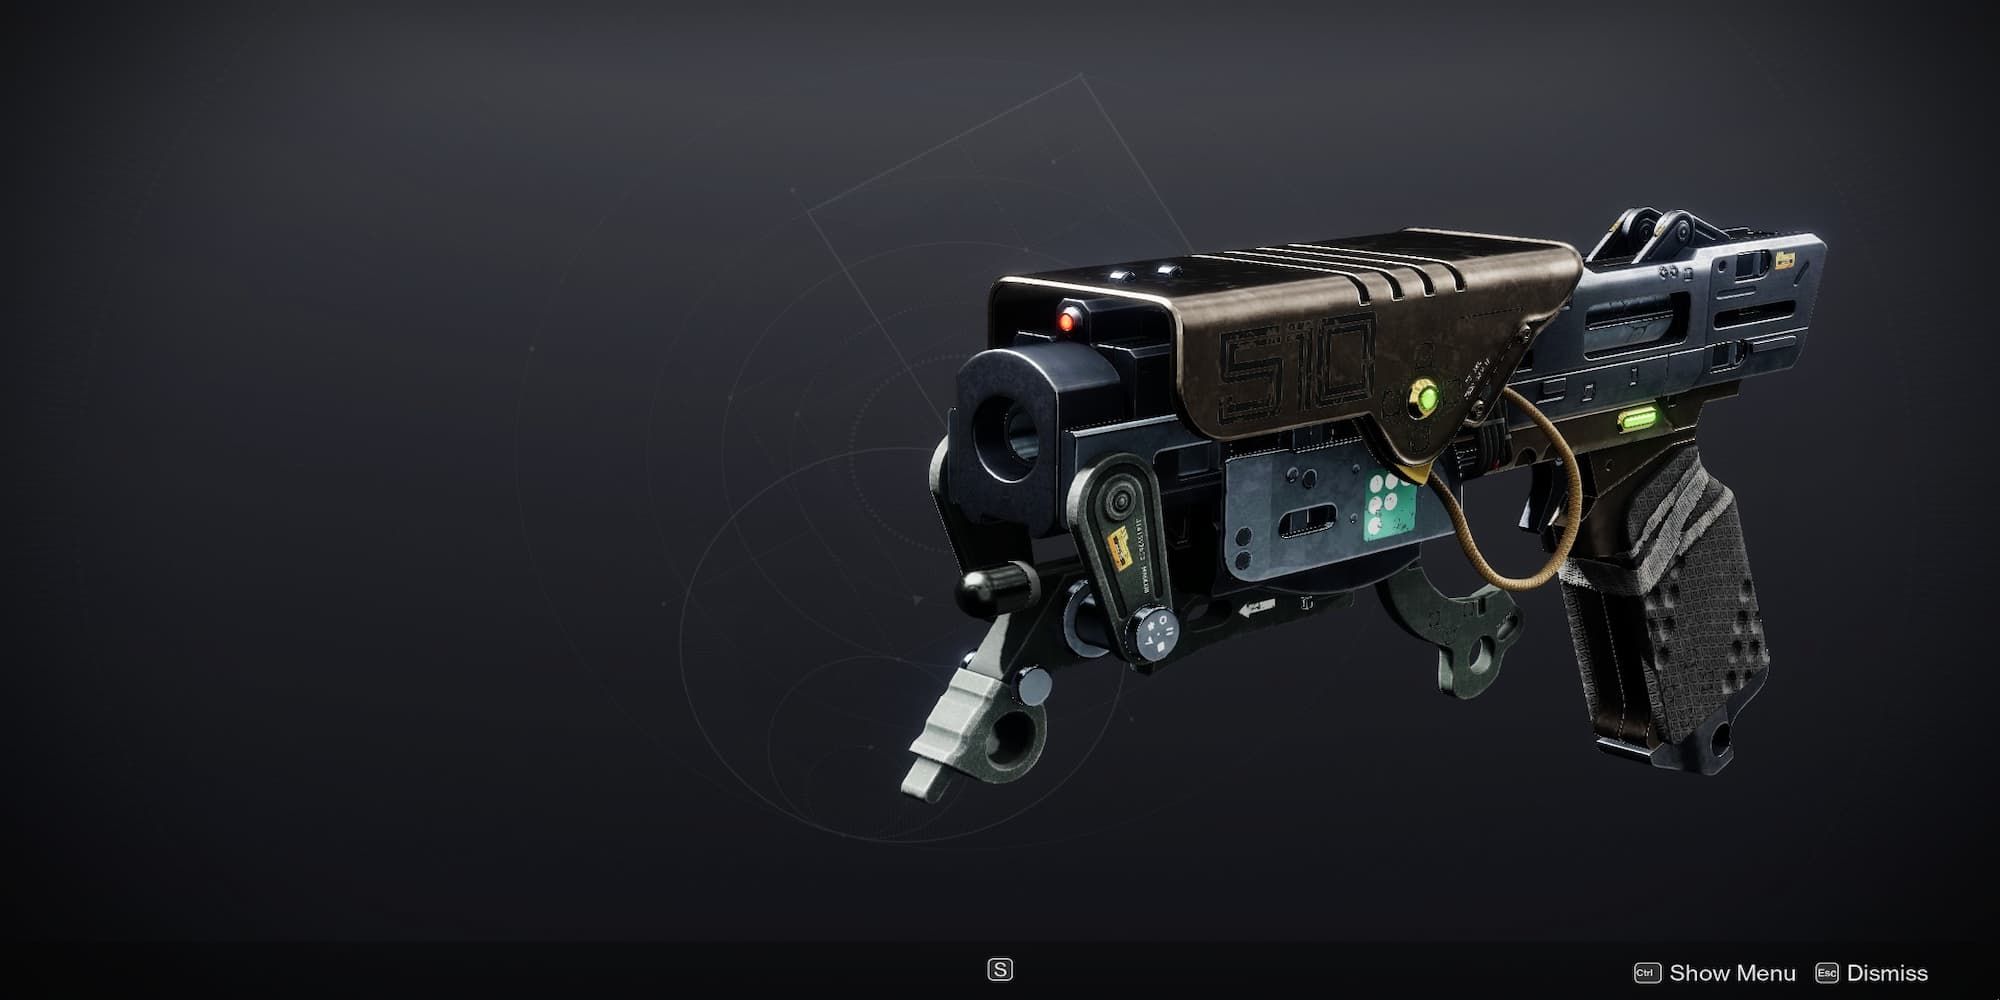 The Indebted Kindness sidearm in Destiny 2